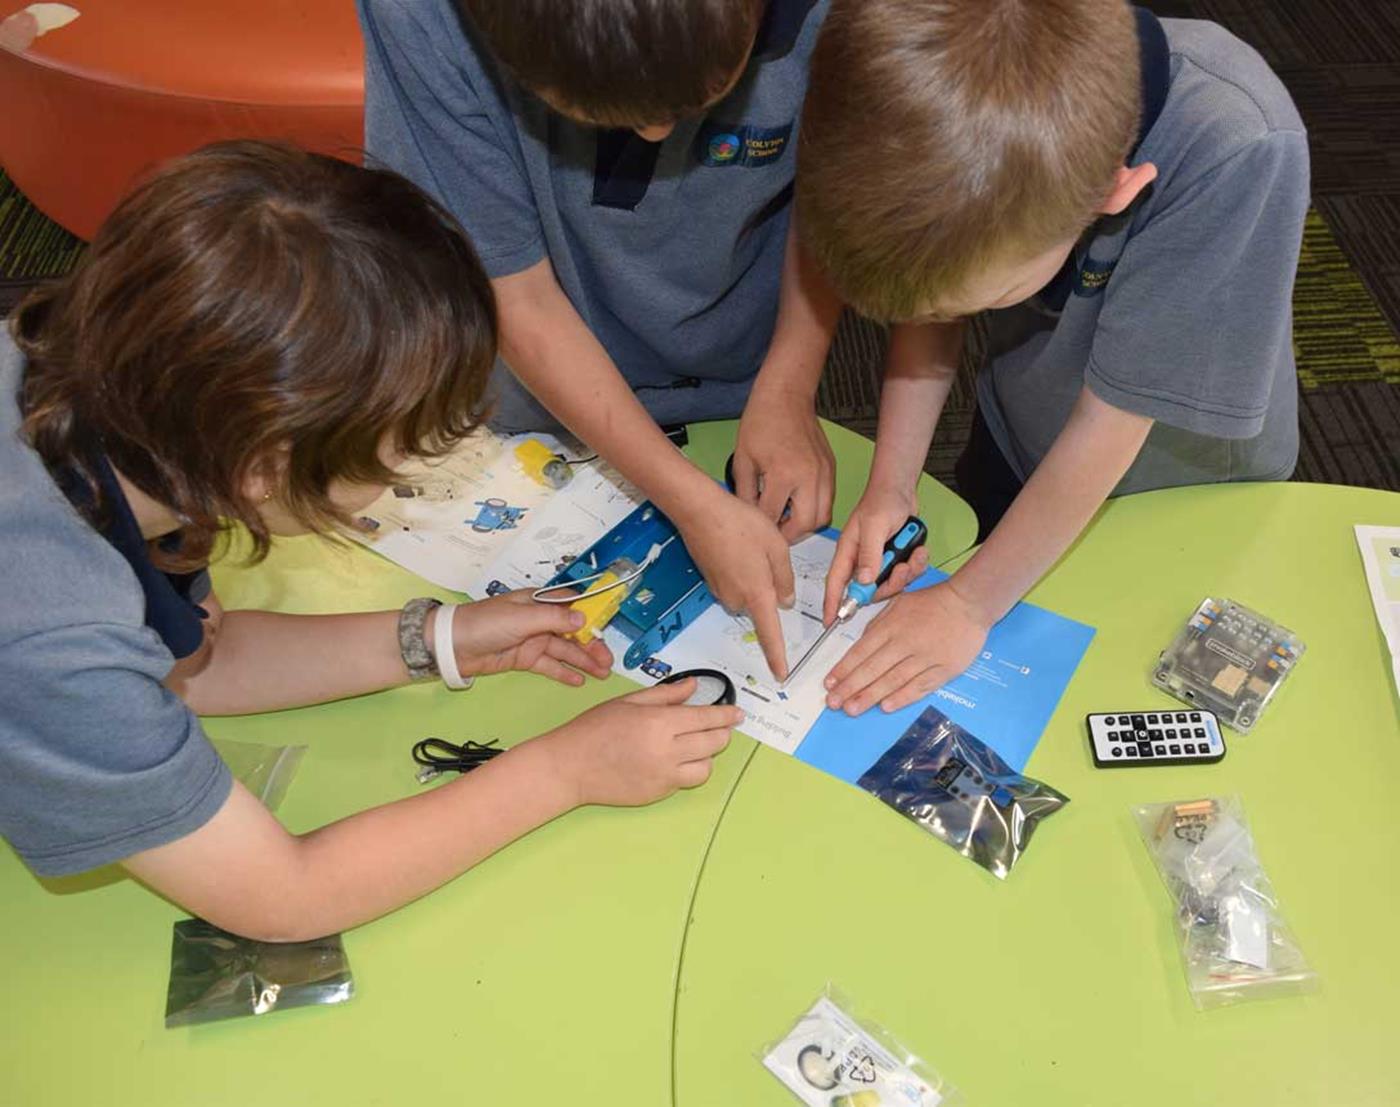 Three students building STEM project in classroom at school